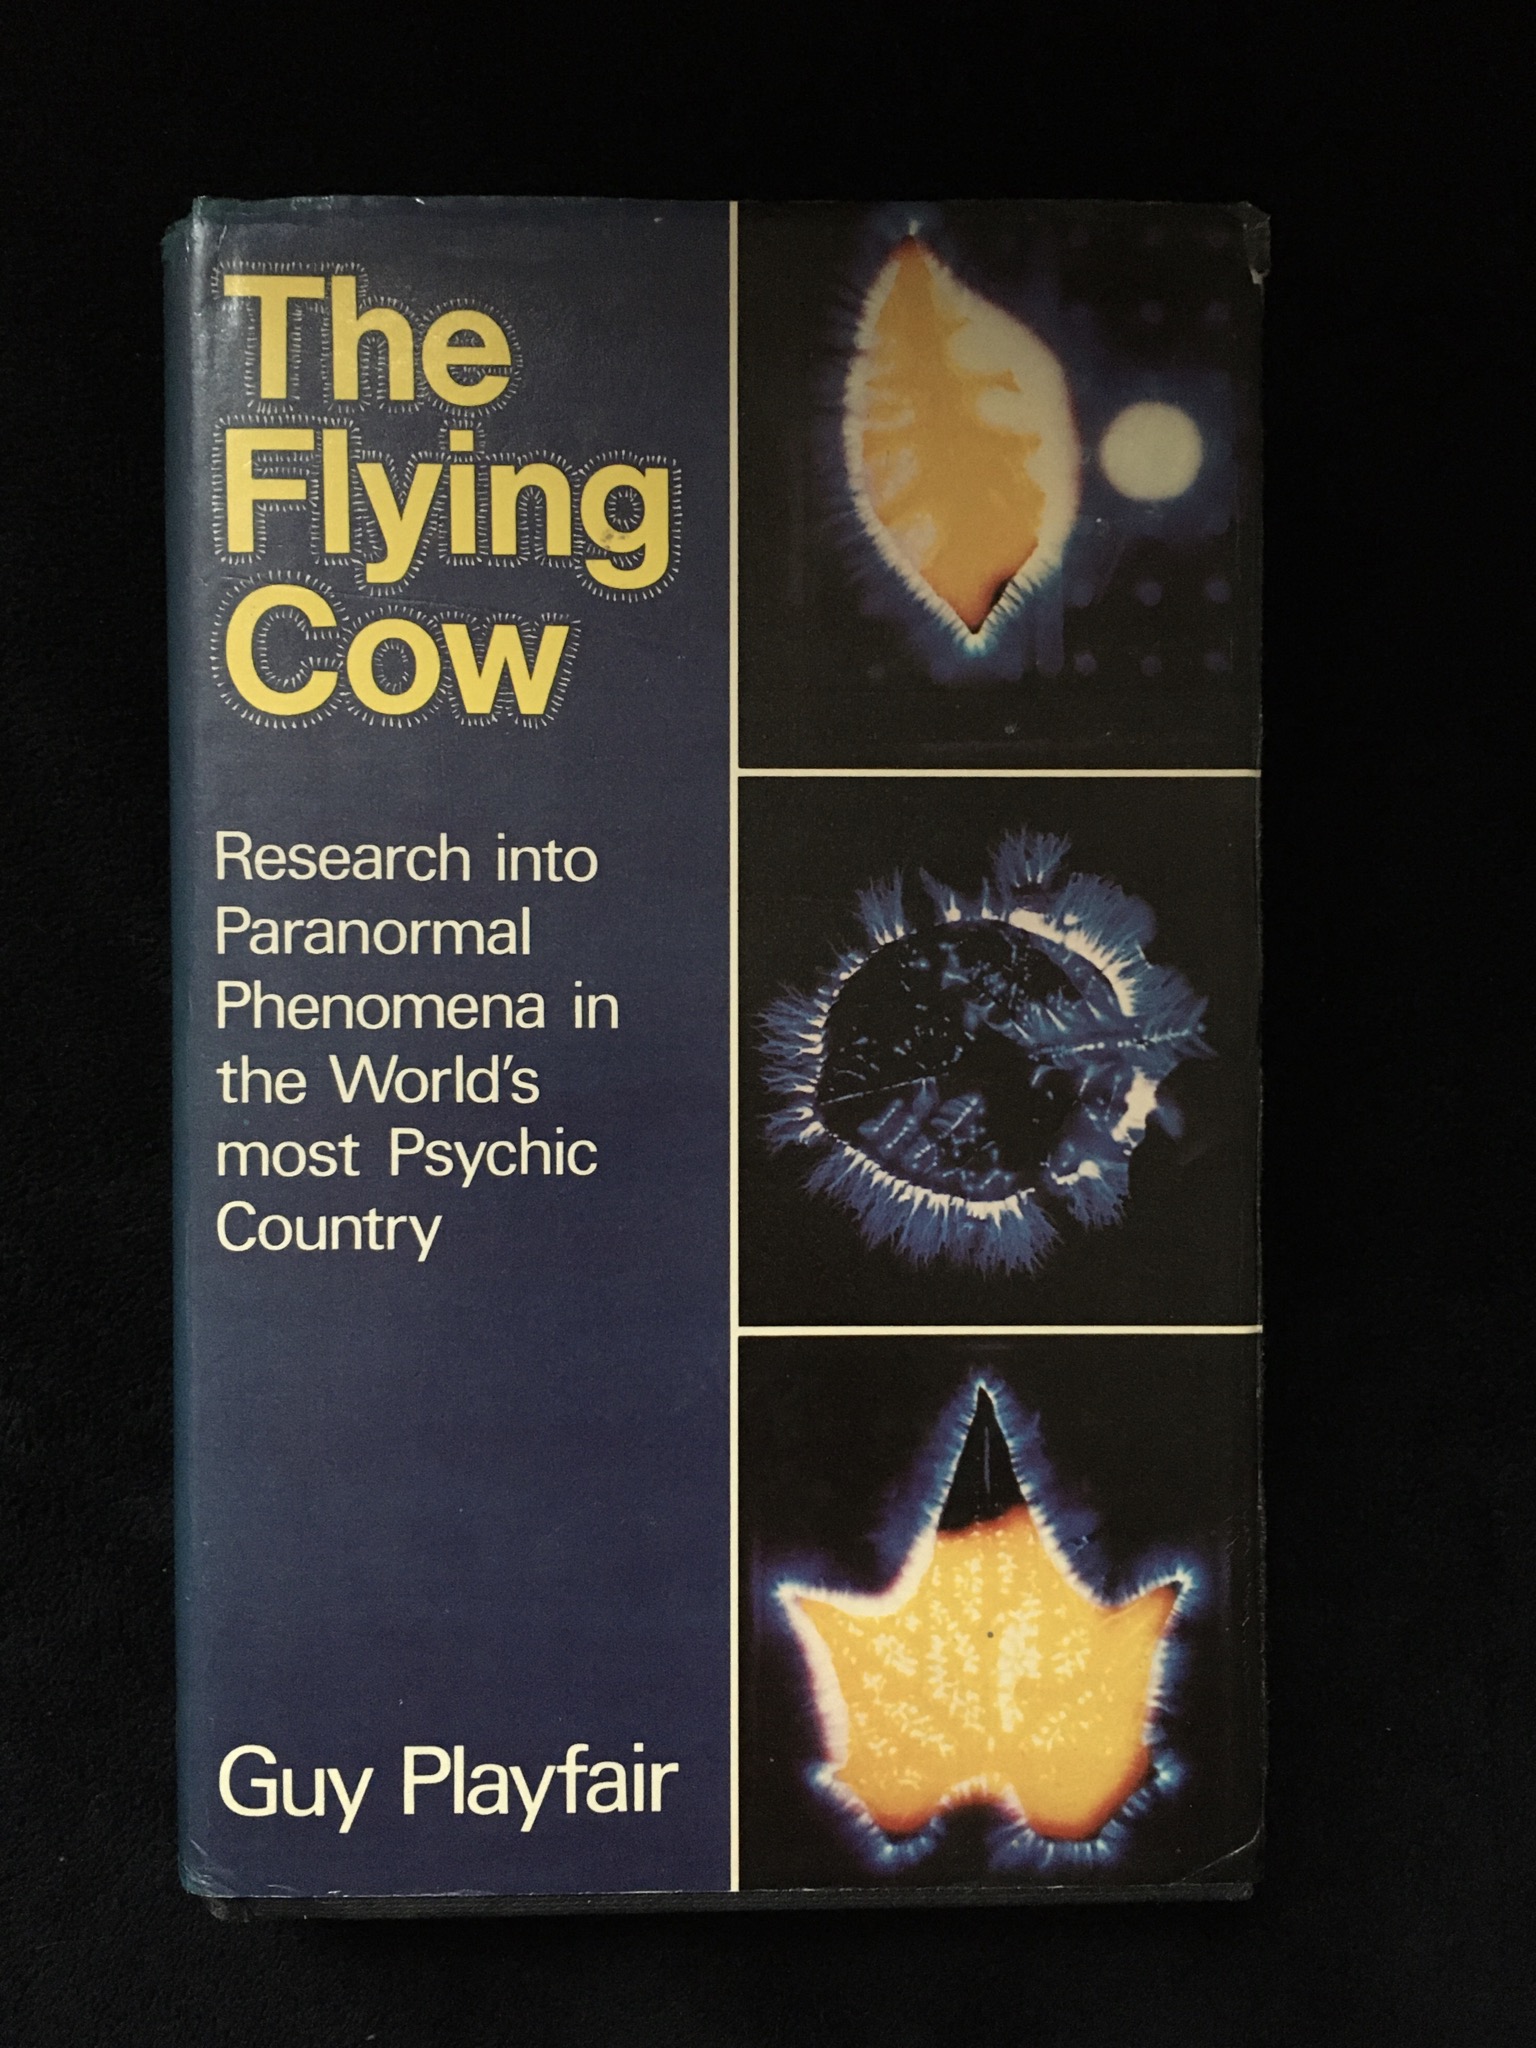 The Flying Cow: Research into Paranormal Phenomena in the World’s most Psychic Country, Guy Playfair